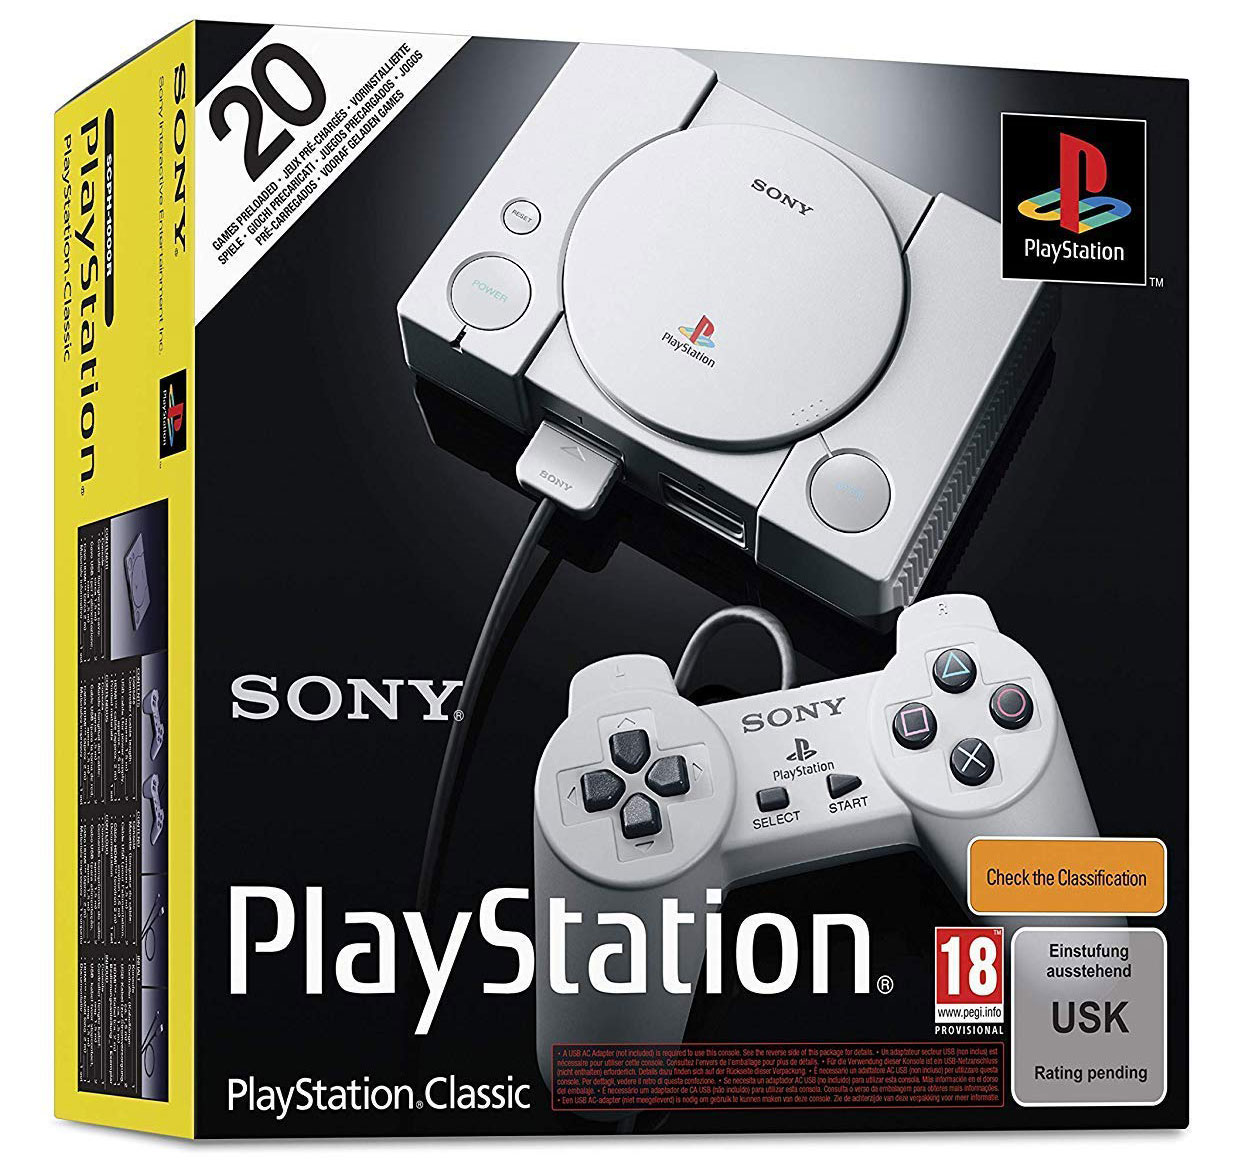 Verpackung der PlayStation Classic